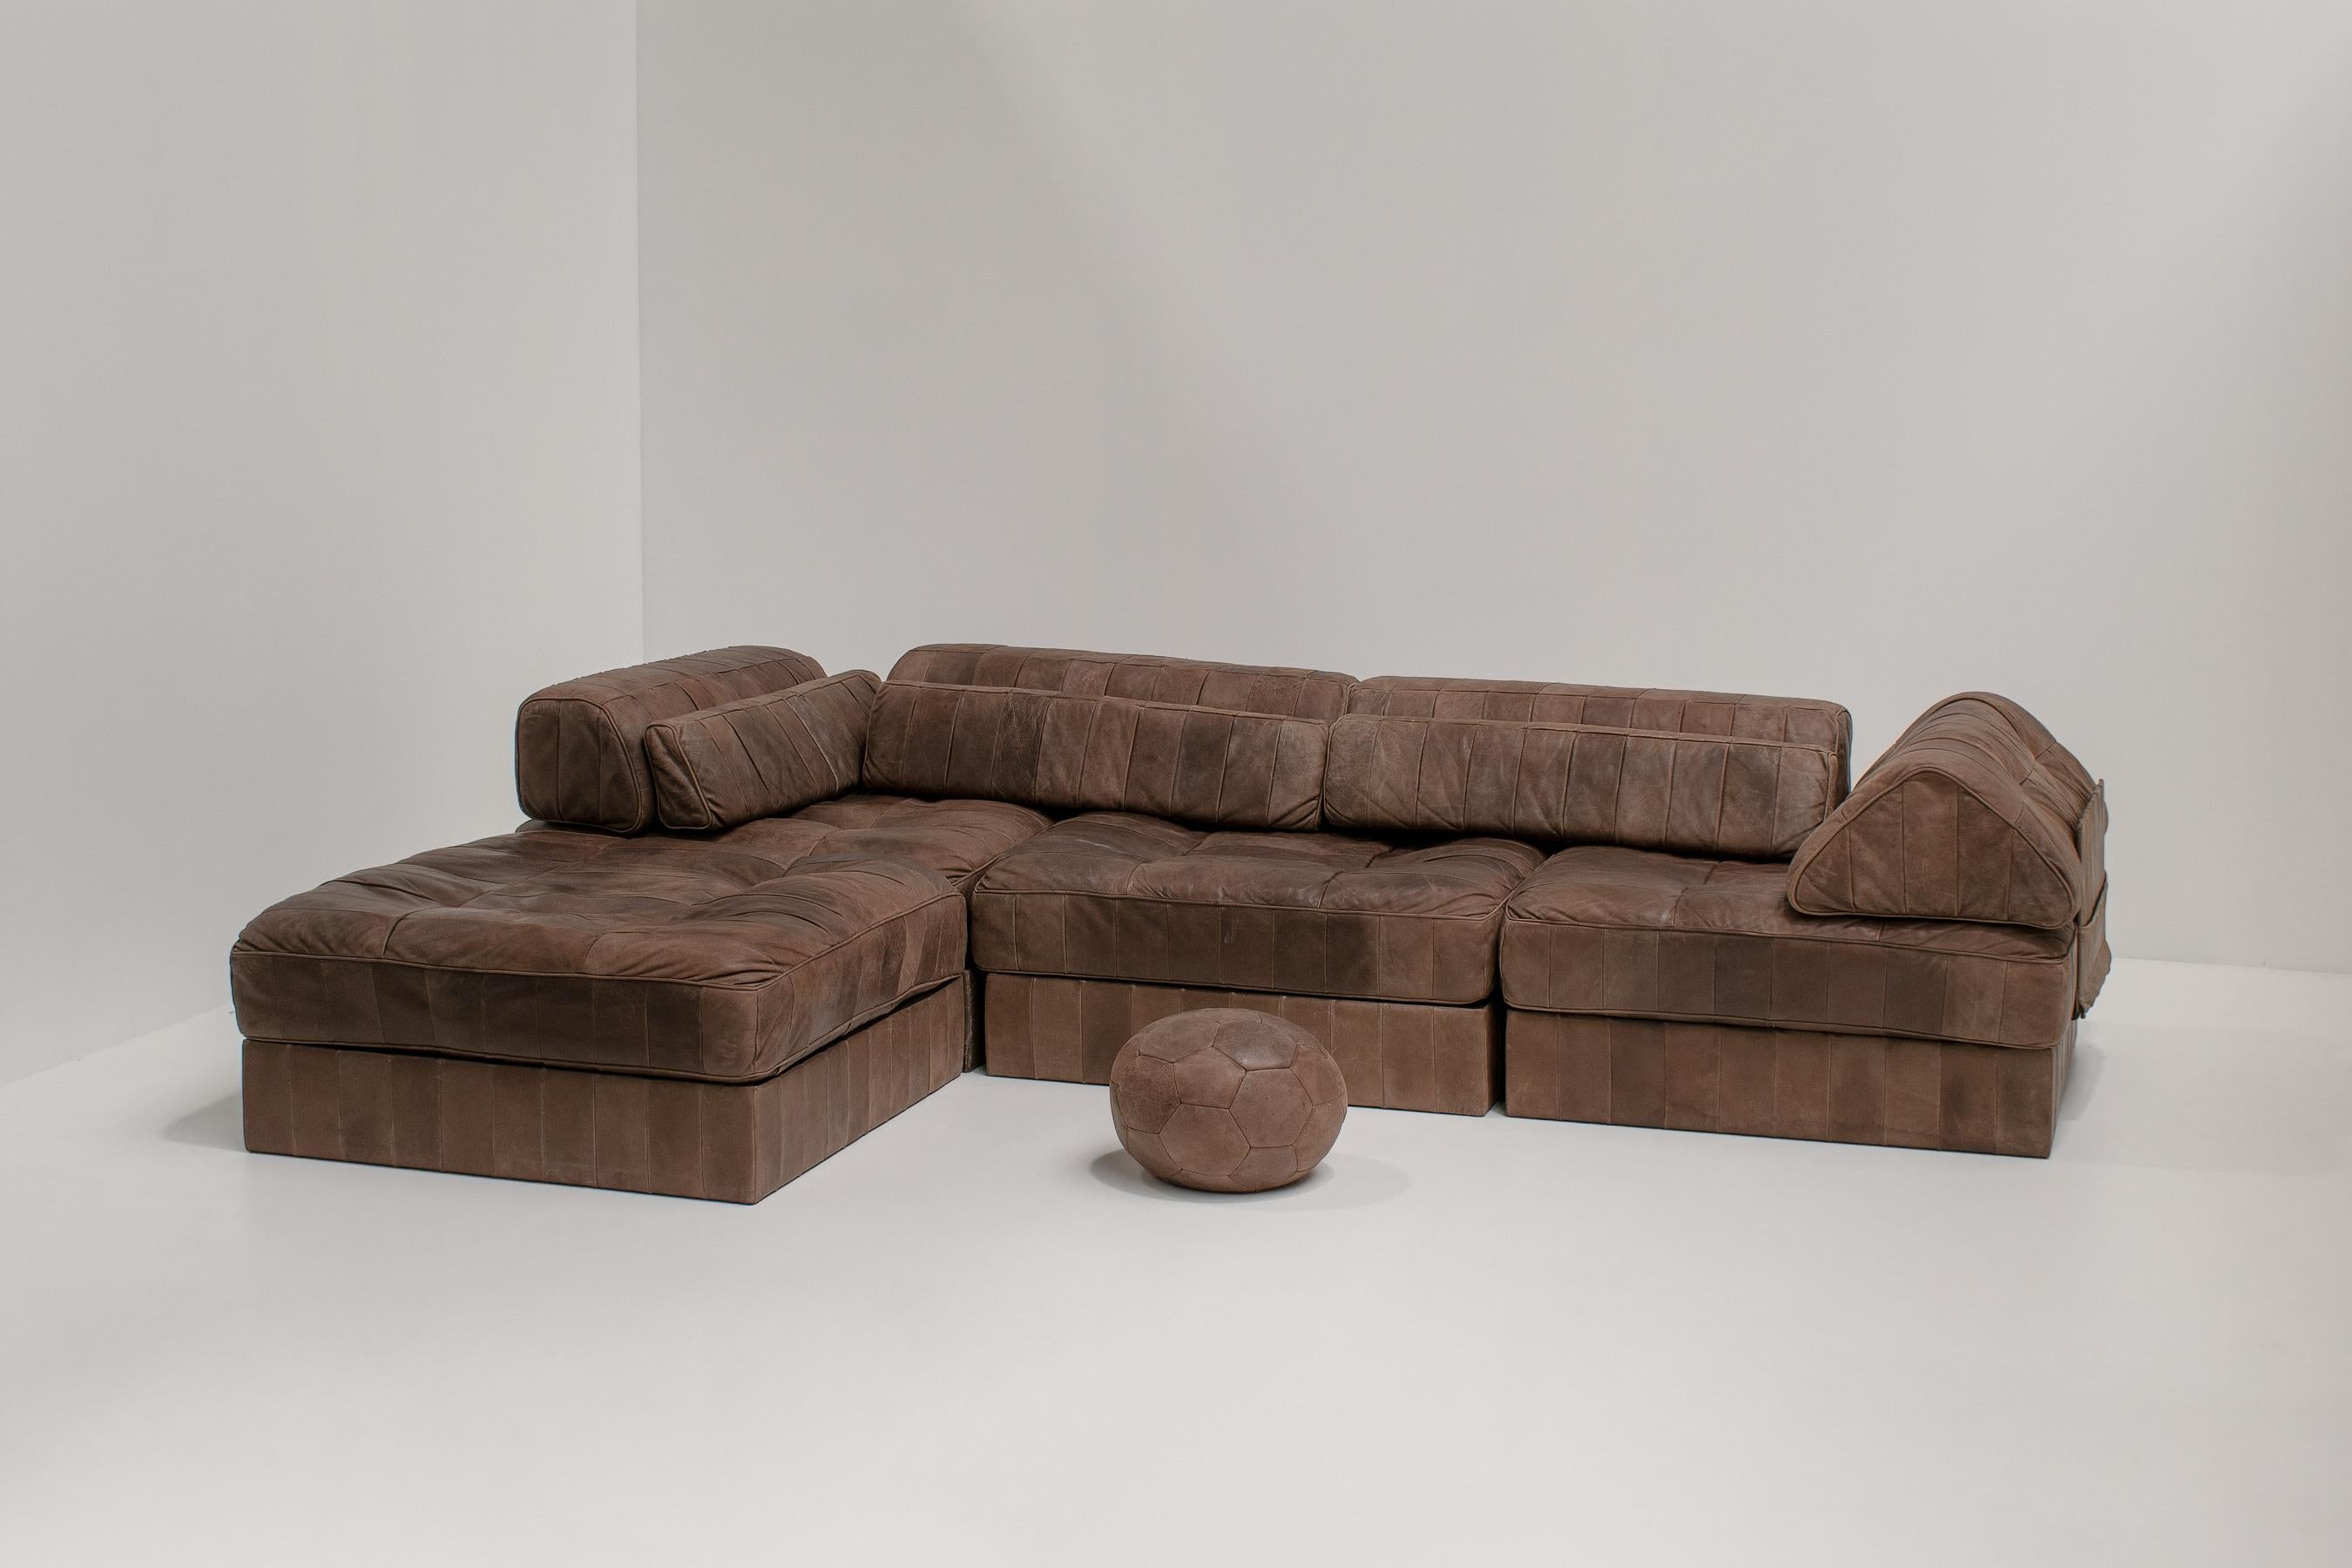 De Sede, 'DS-88' sectional sofa, leather, Switzerland, the 1970s. 

This is the ultimate 70s modular patchwork sofa. But, because of its straight lines, it still has a very modern feeling to it. 
What makes this sofa the perfect match for any